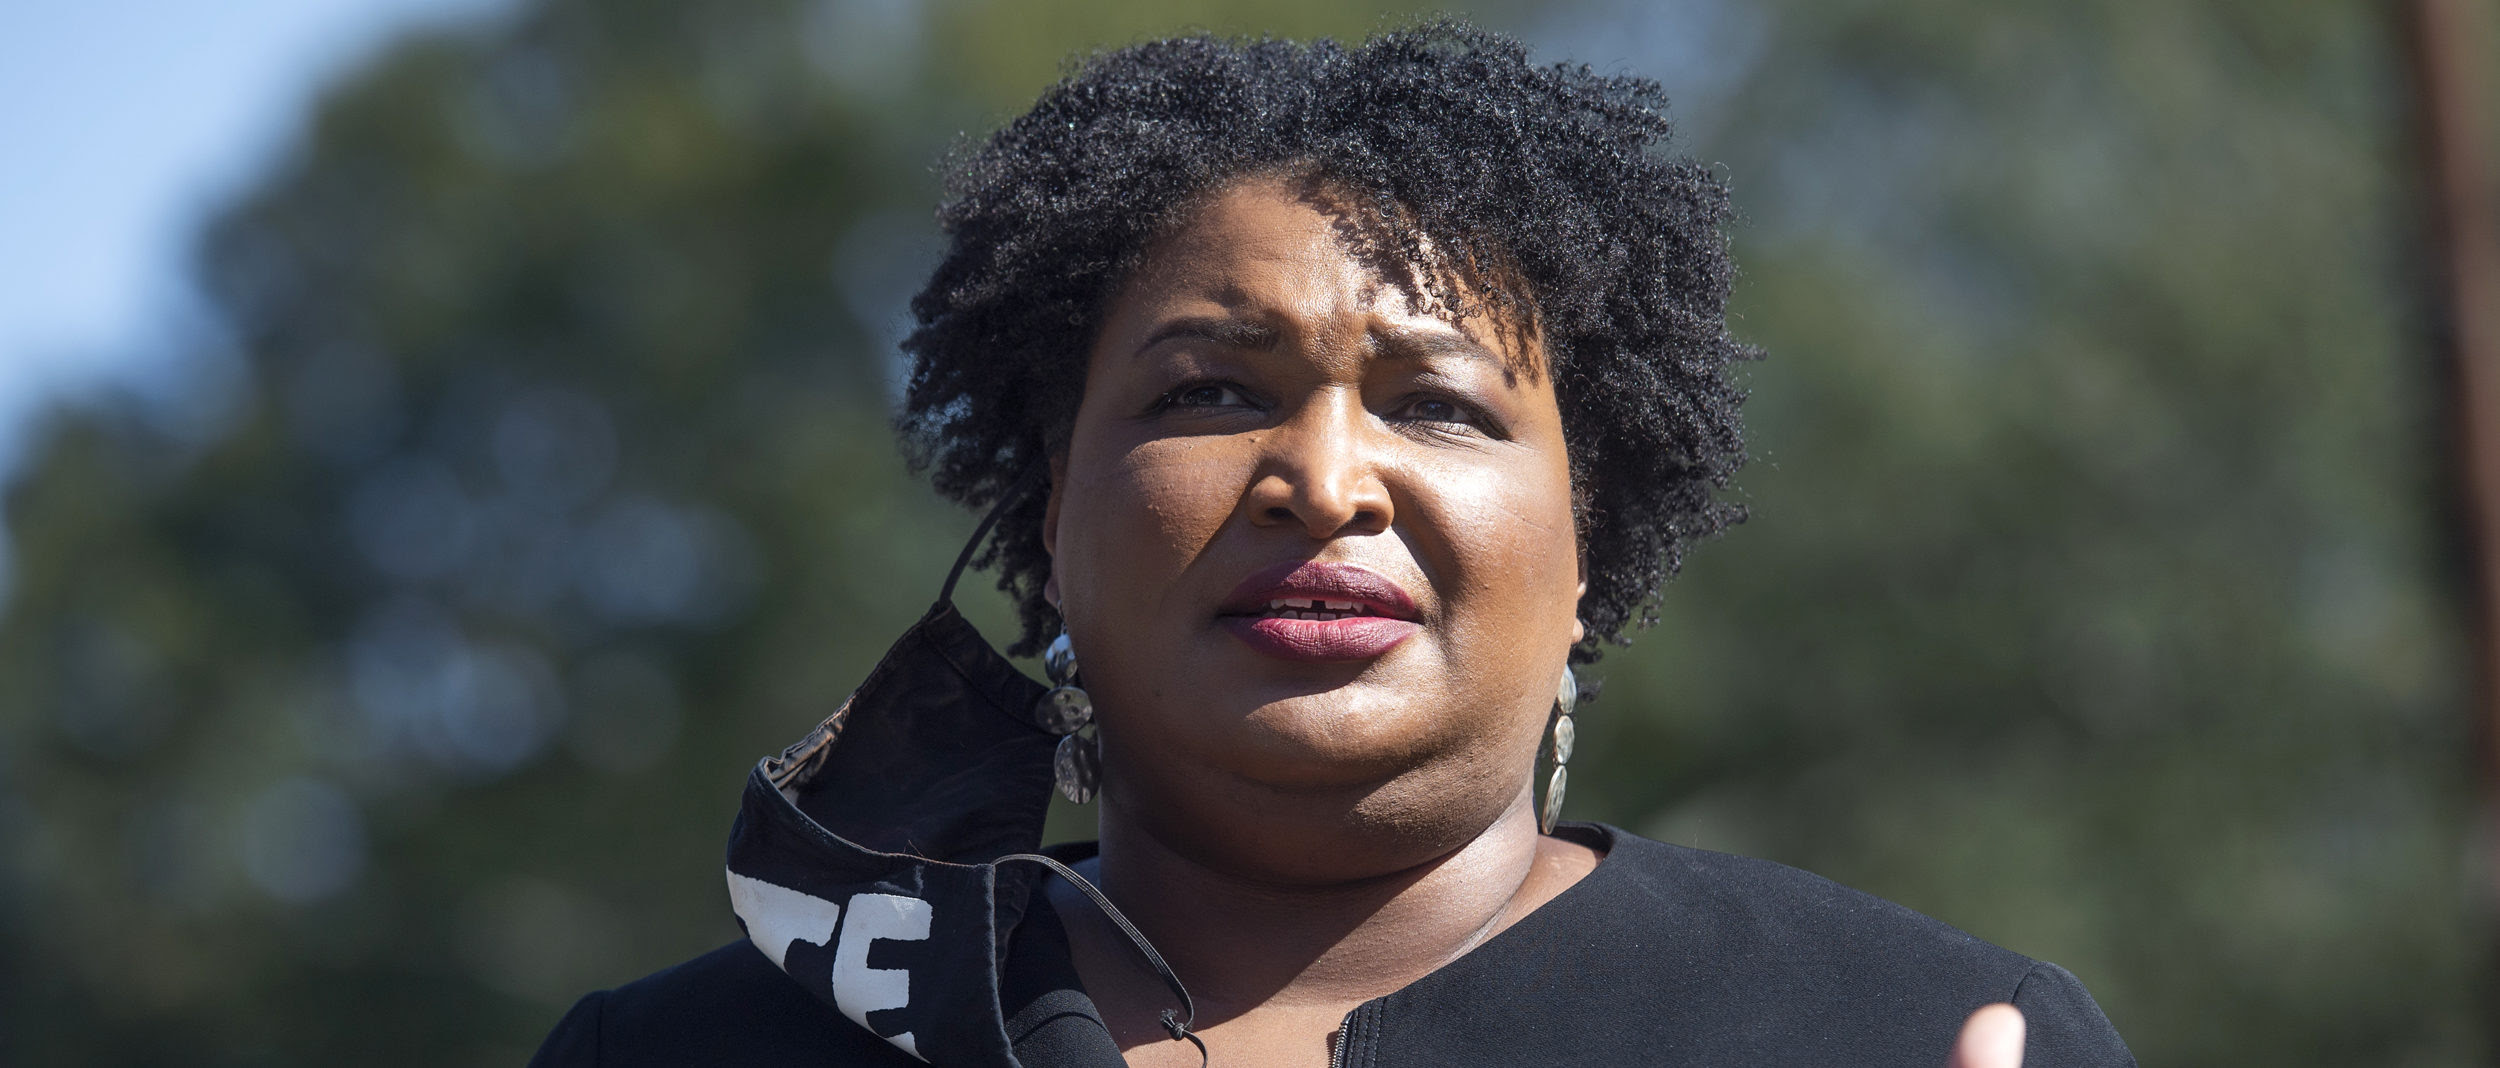 Stacey Abrams Trails Further Behind Kemp In Georgia Governor’s Race